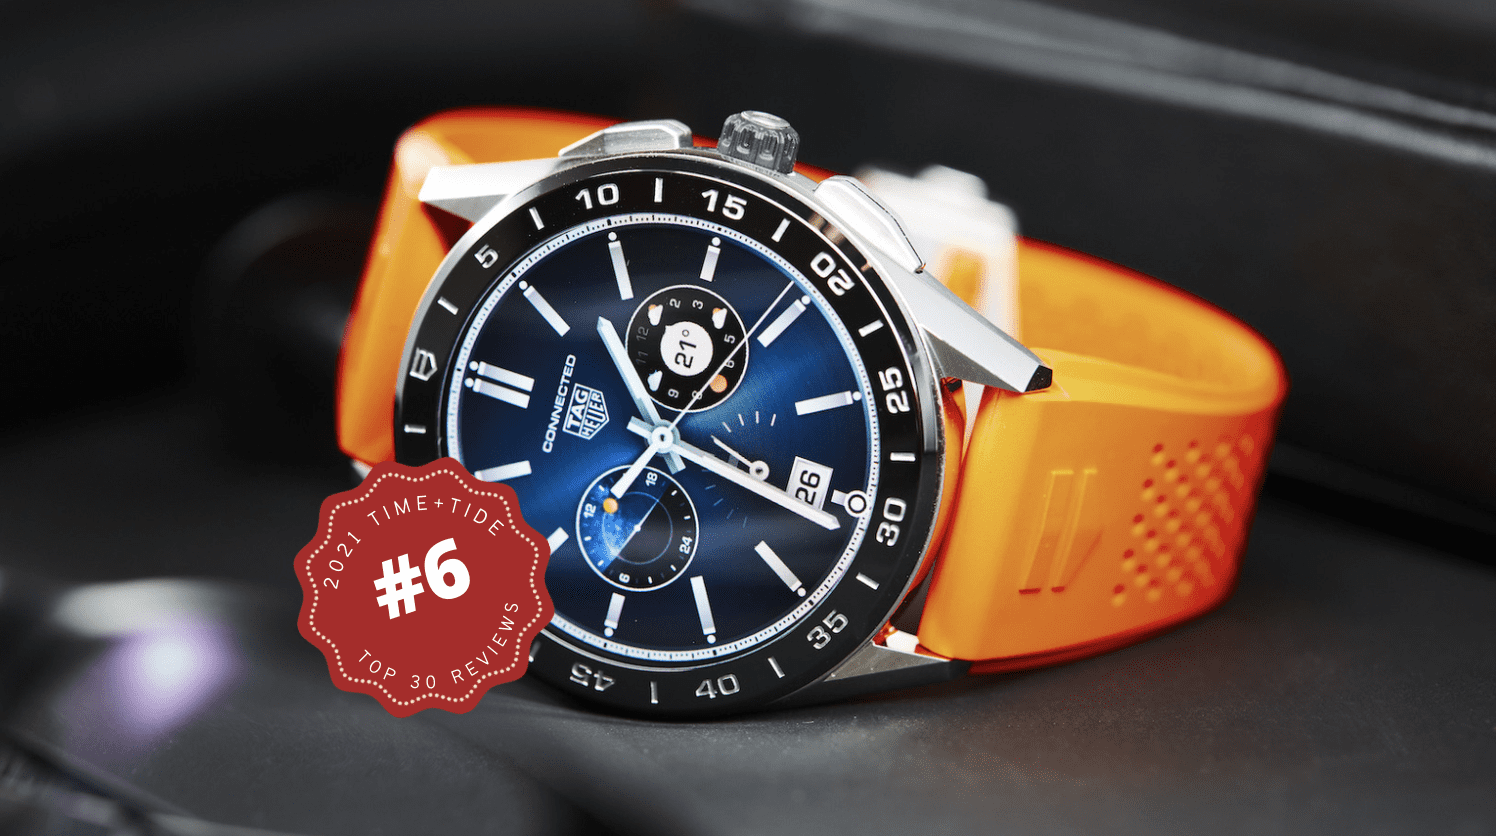 THE TOP WATCH REVIEWS OF 2021 – The TAG Heuer Connected collection (#6)